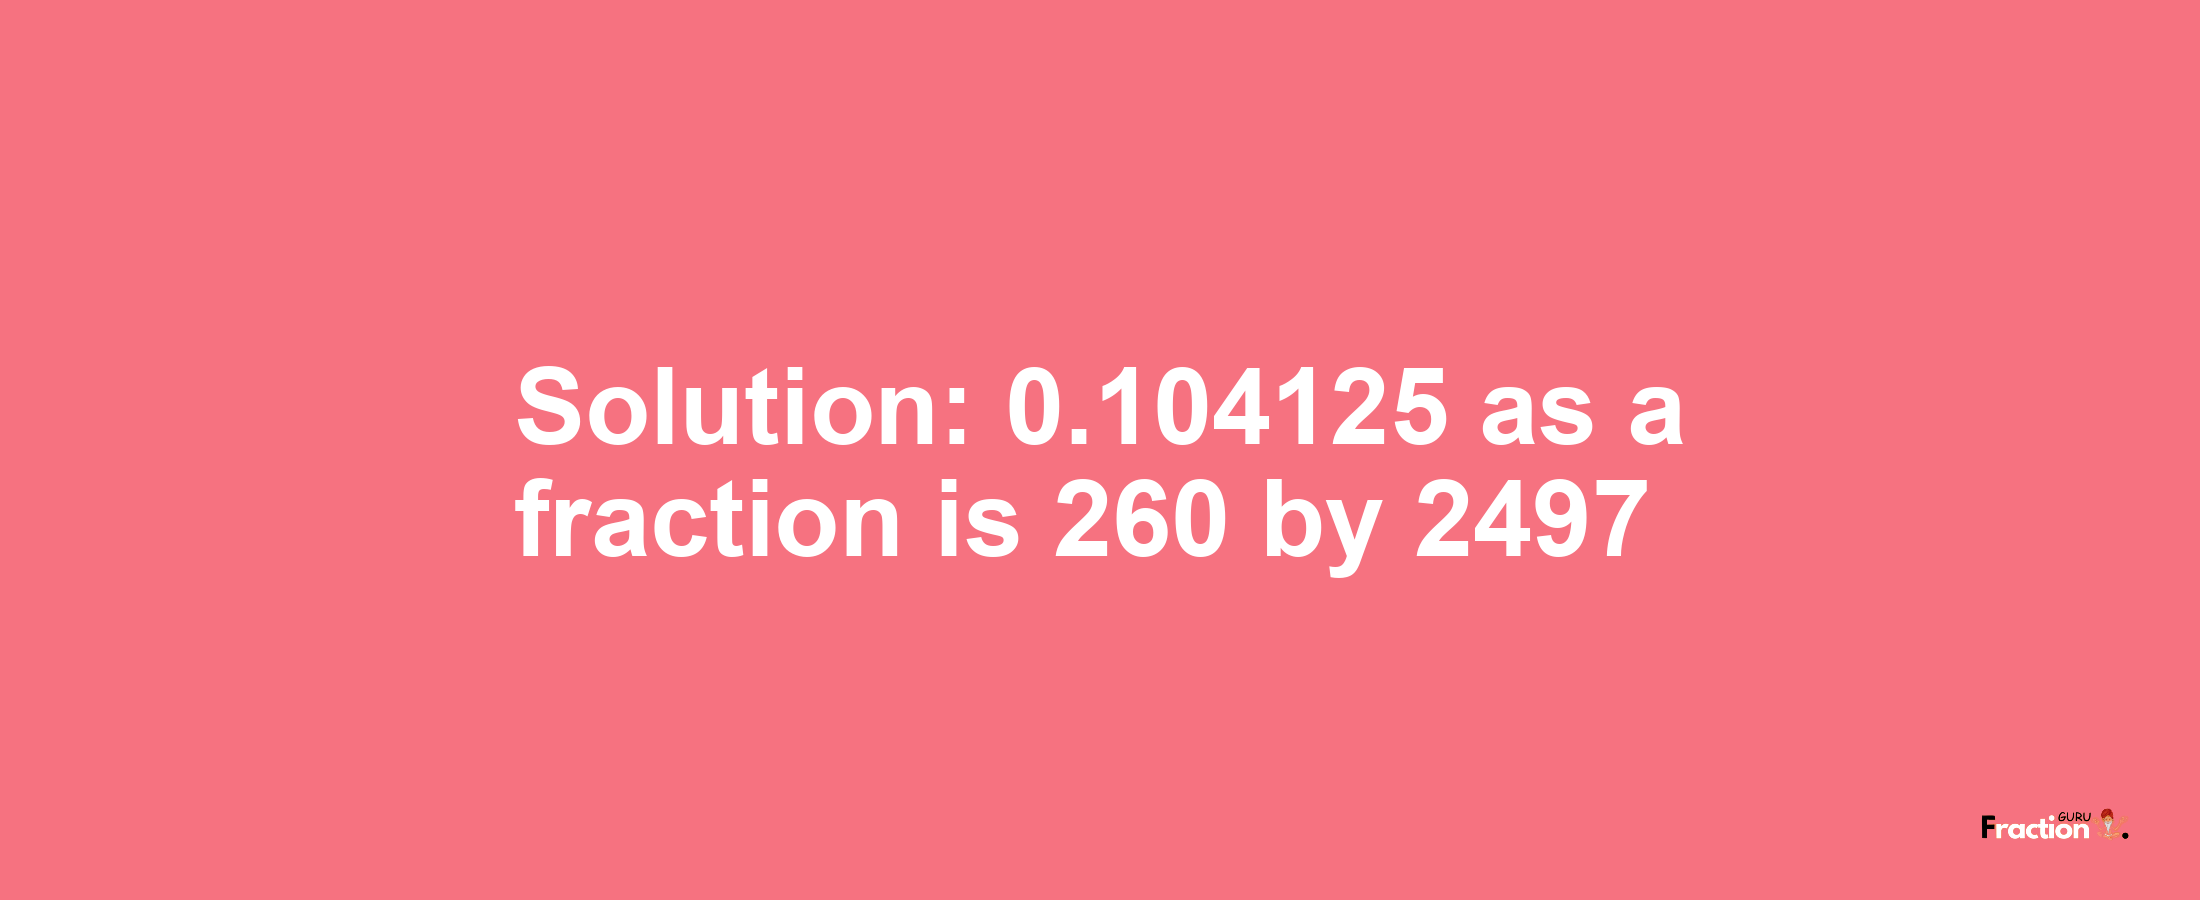 Solution:0.104125 as a fraction is 260/2497